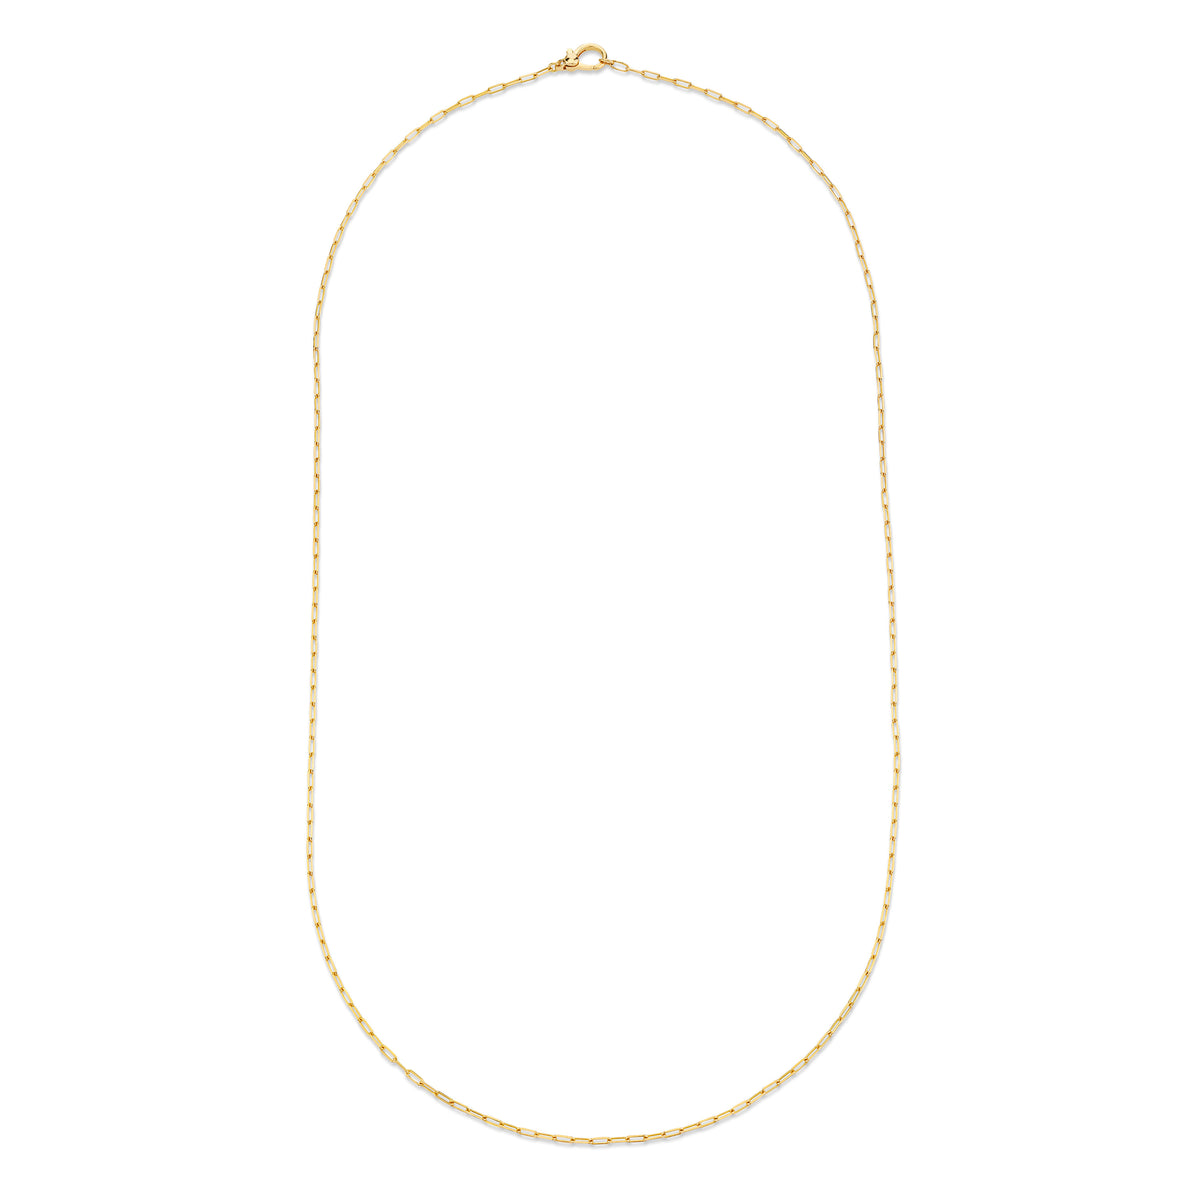 MEN'S SOLID GOLD BOX LINK CHAIN